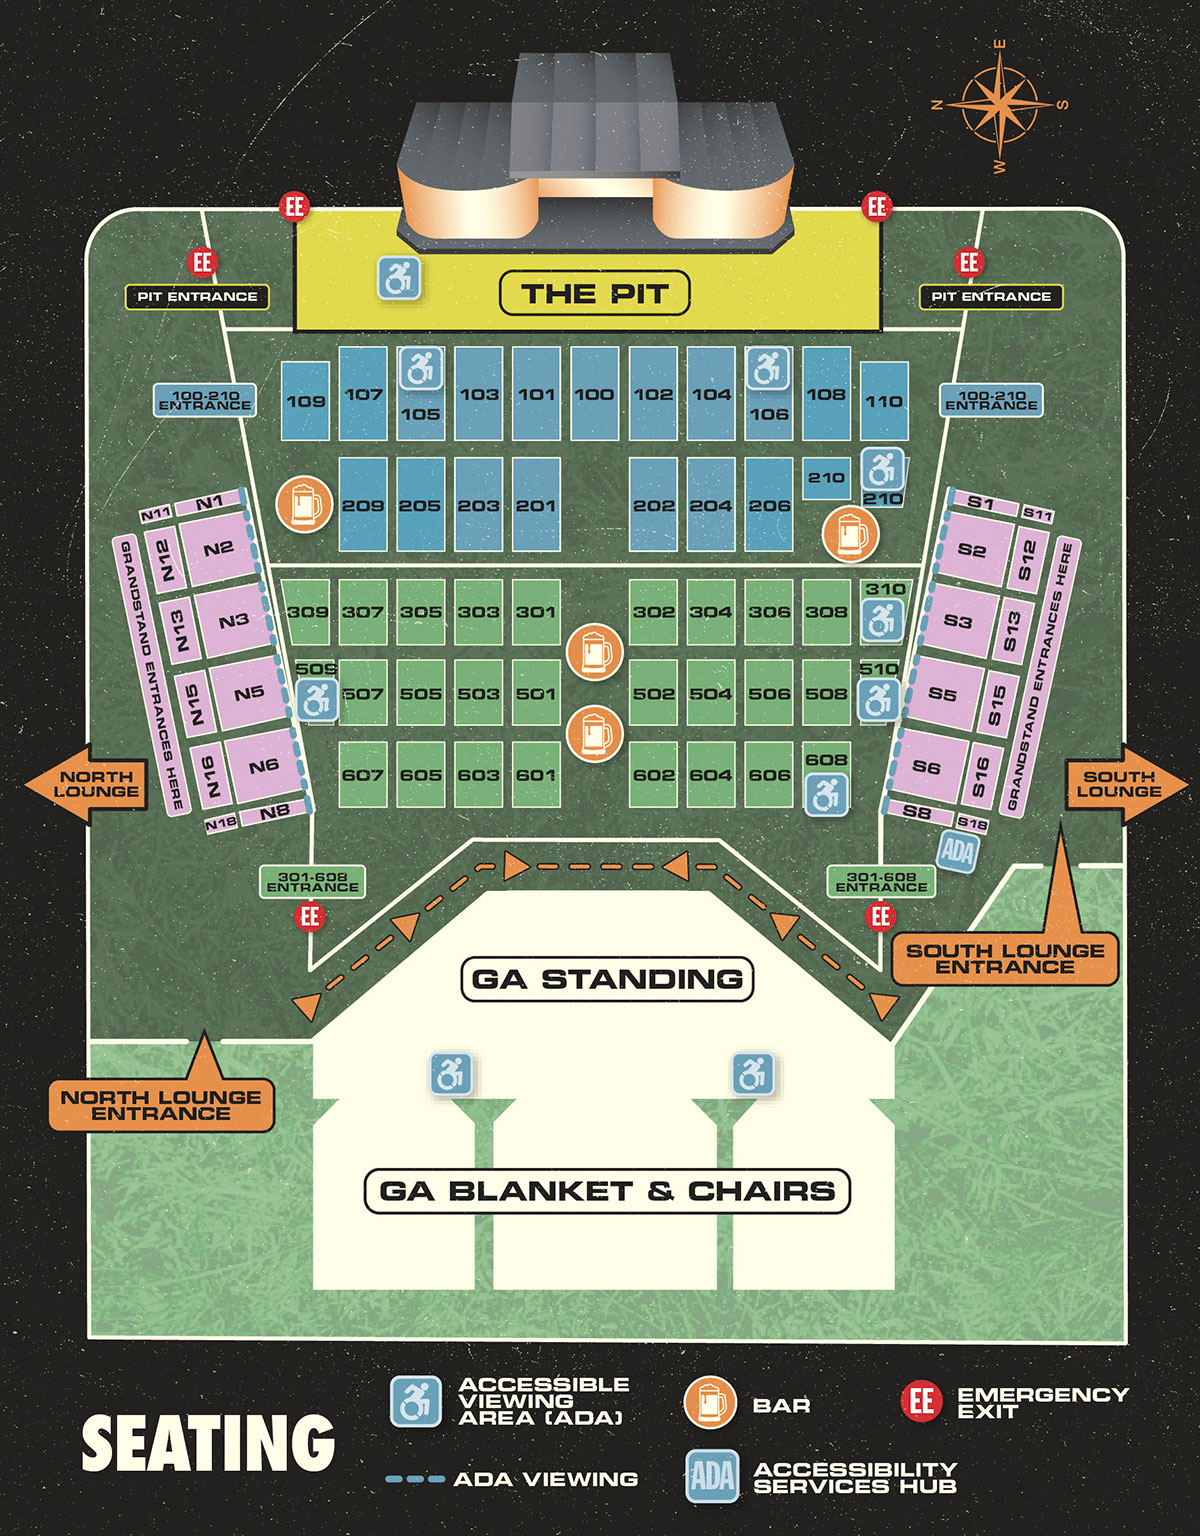 Seating & Maps